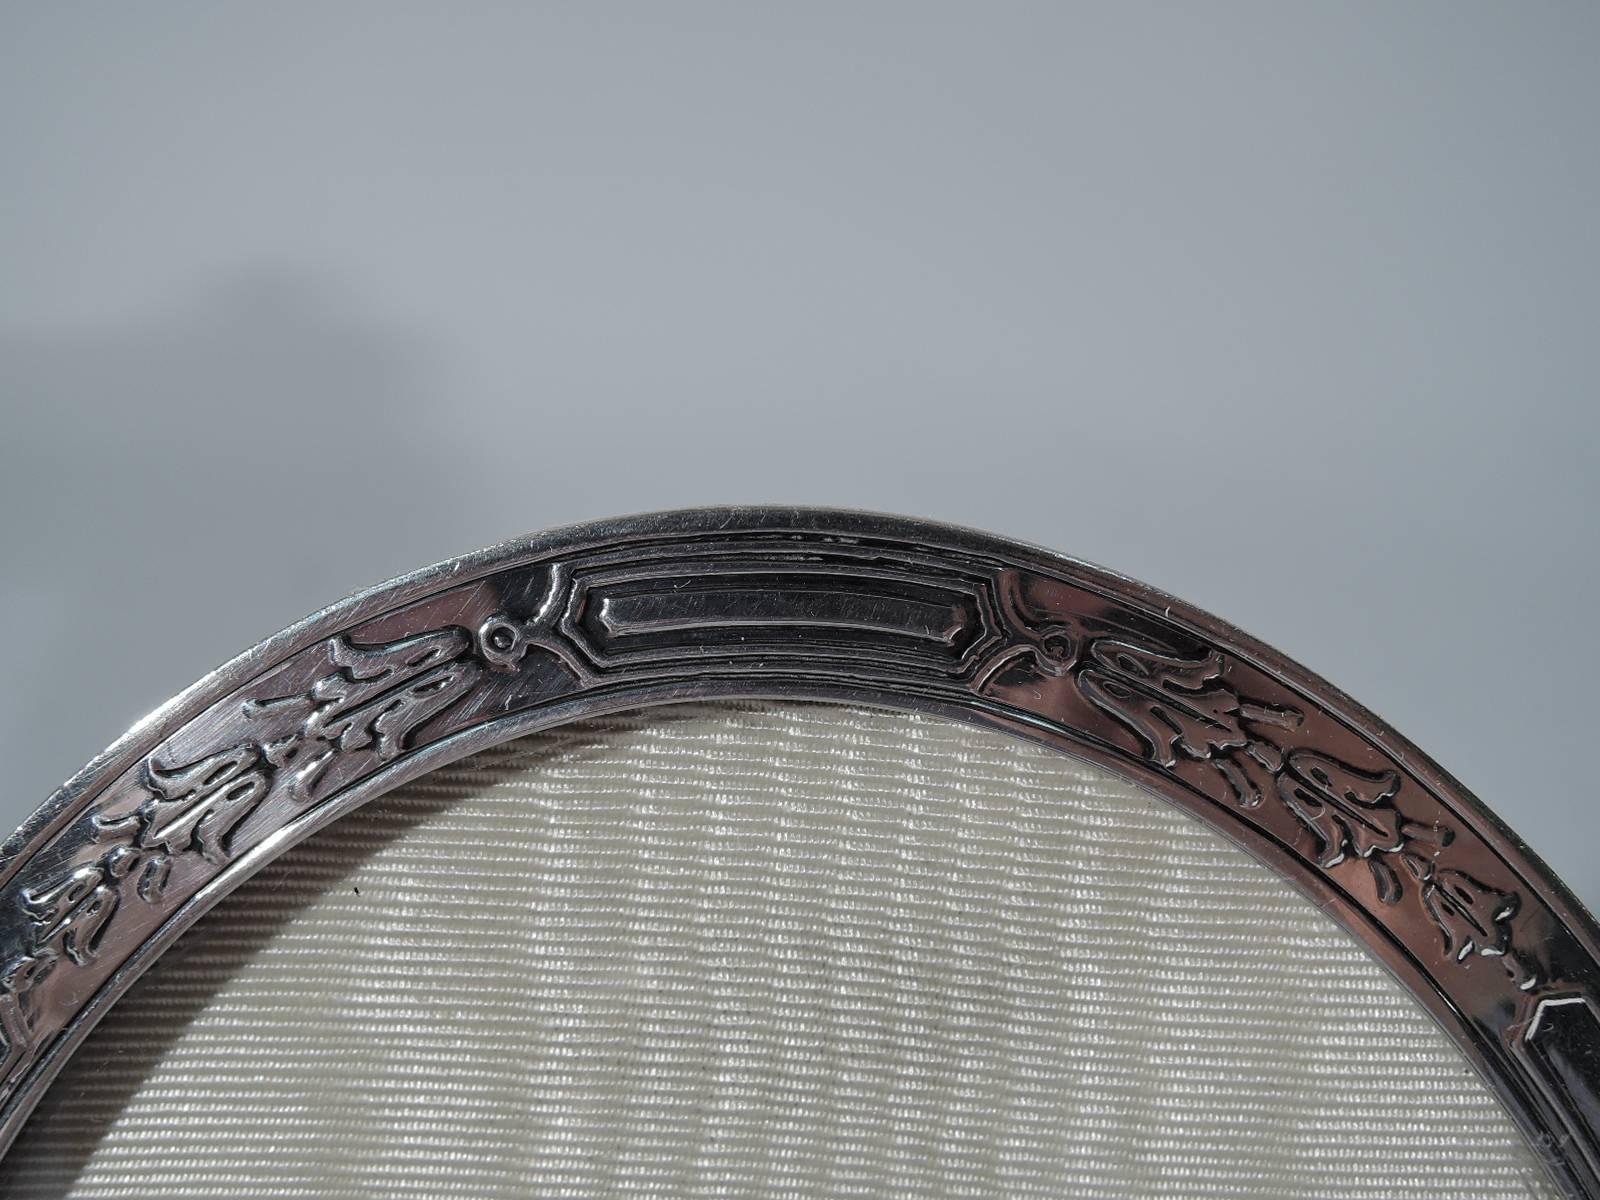 Edwardian sterling silver picture frame. Made by Tiffany & Co. in New York, circa 1910. Oval window and flat border with acid-etched imbricated flowers. Vacant cartouche. With glass, silk lining, and stained wood back and hinged support. Hallmark